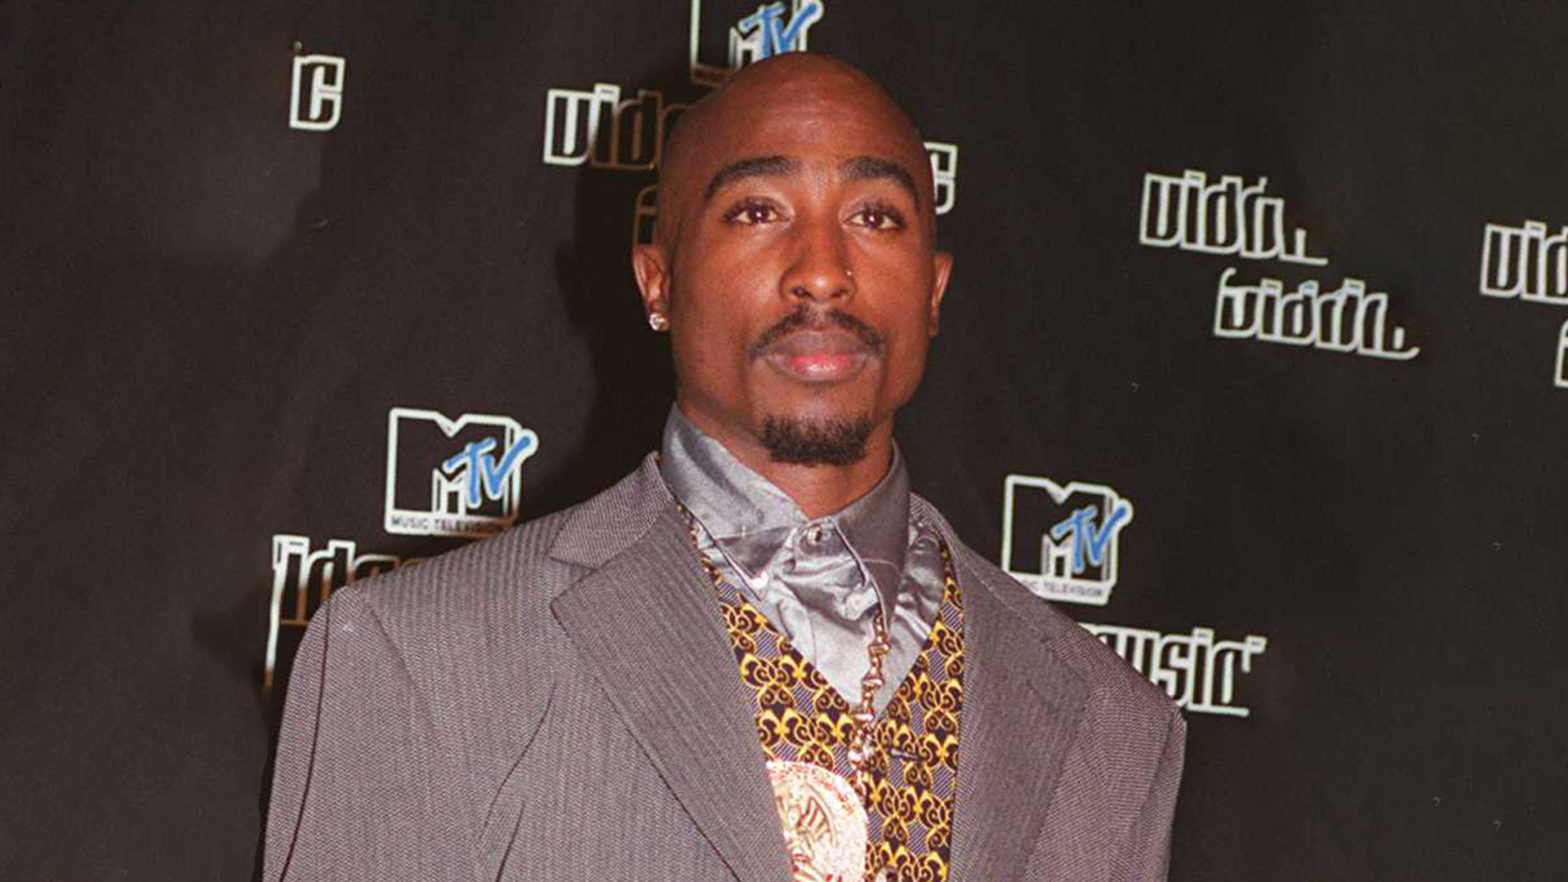 A Ring Worn By Tupac Days Before His Passing Sells At Auction For A Whopping $1.02M